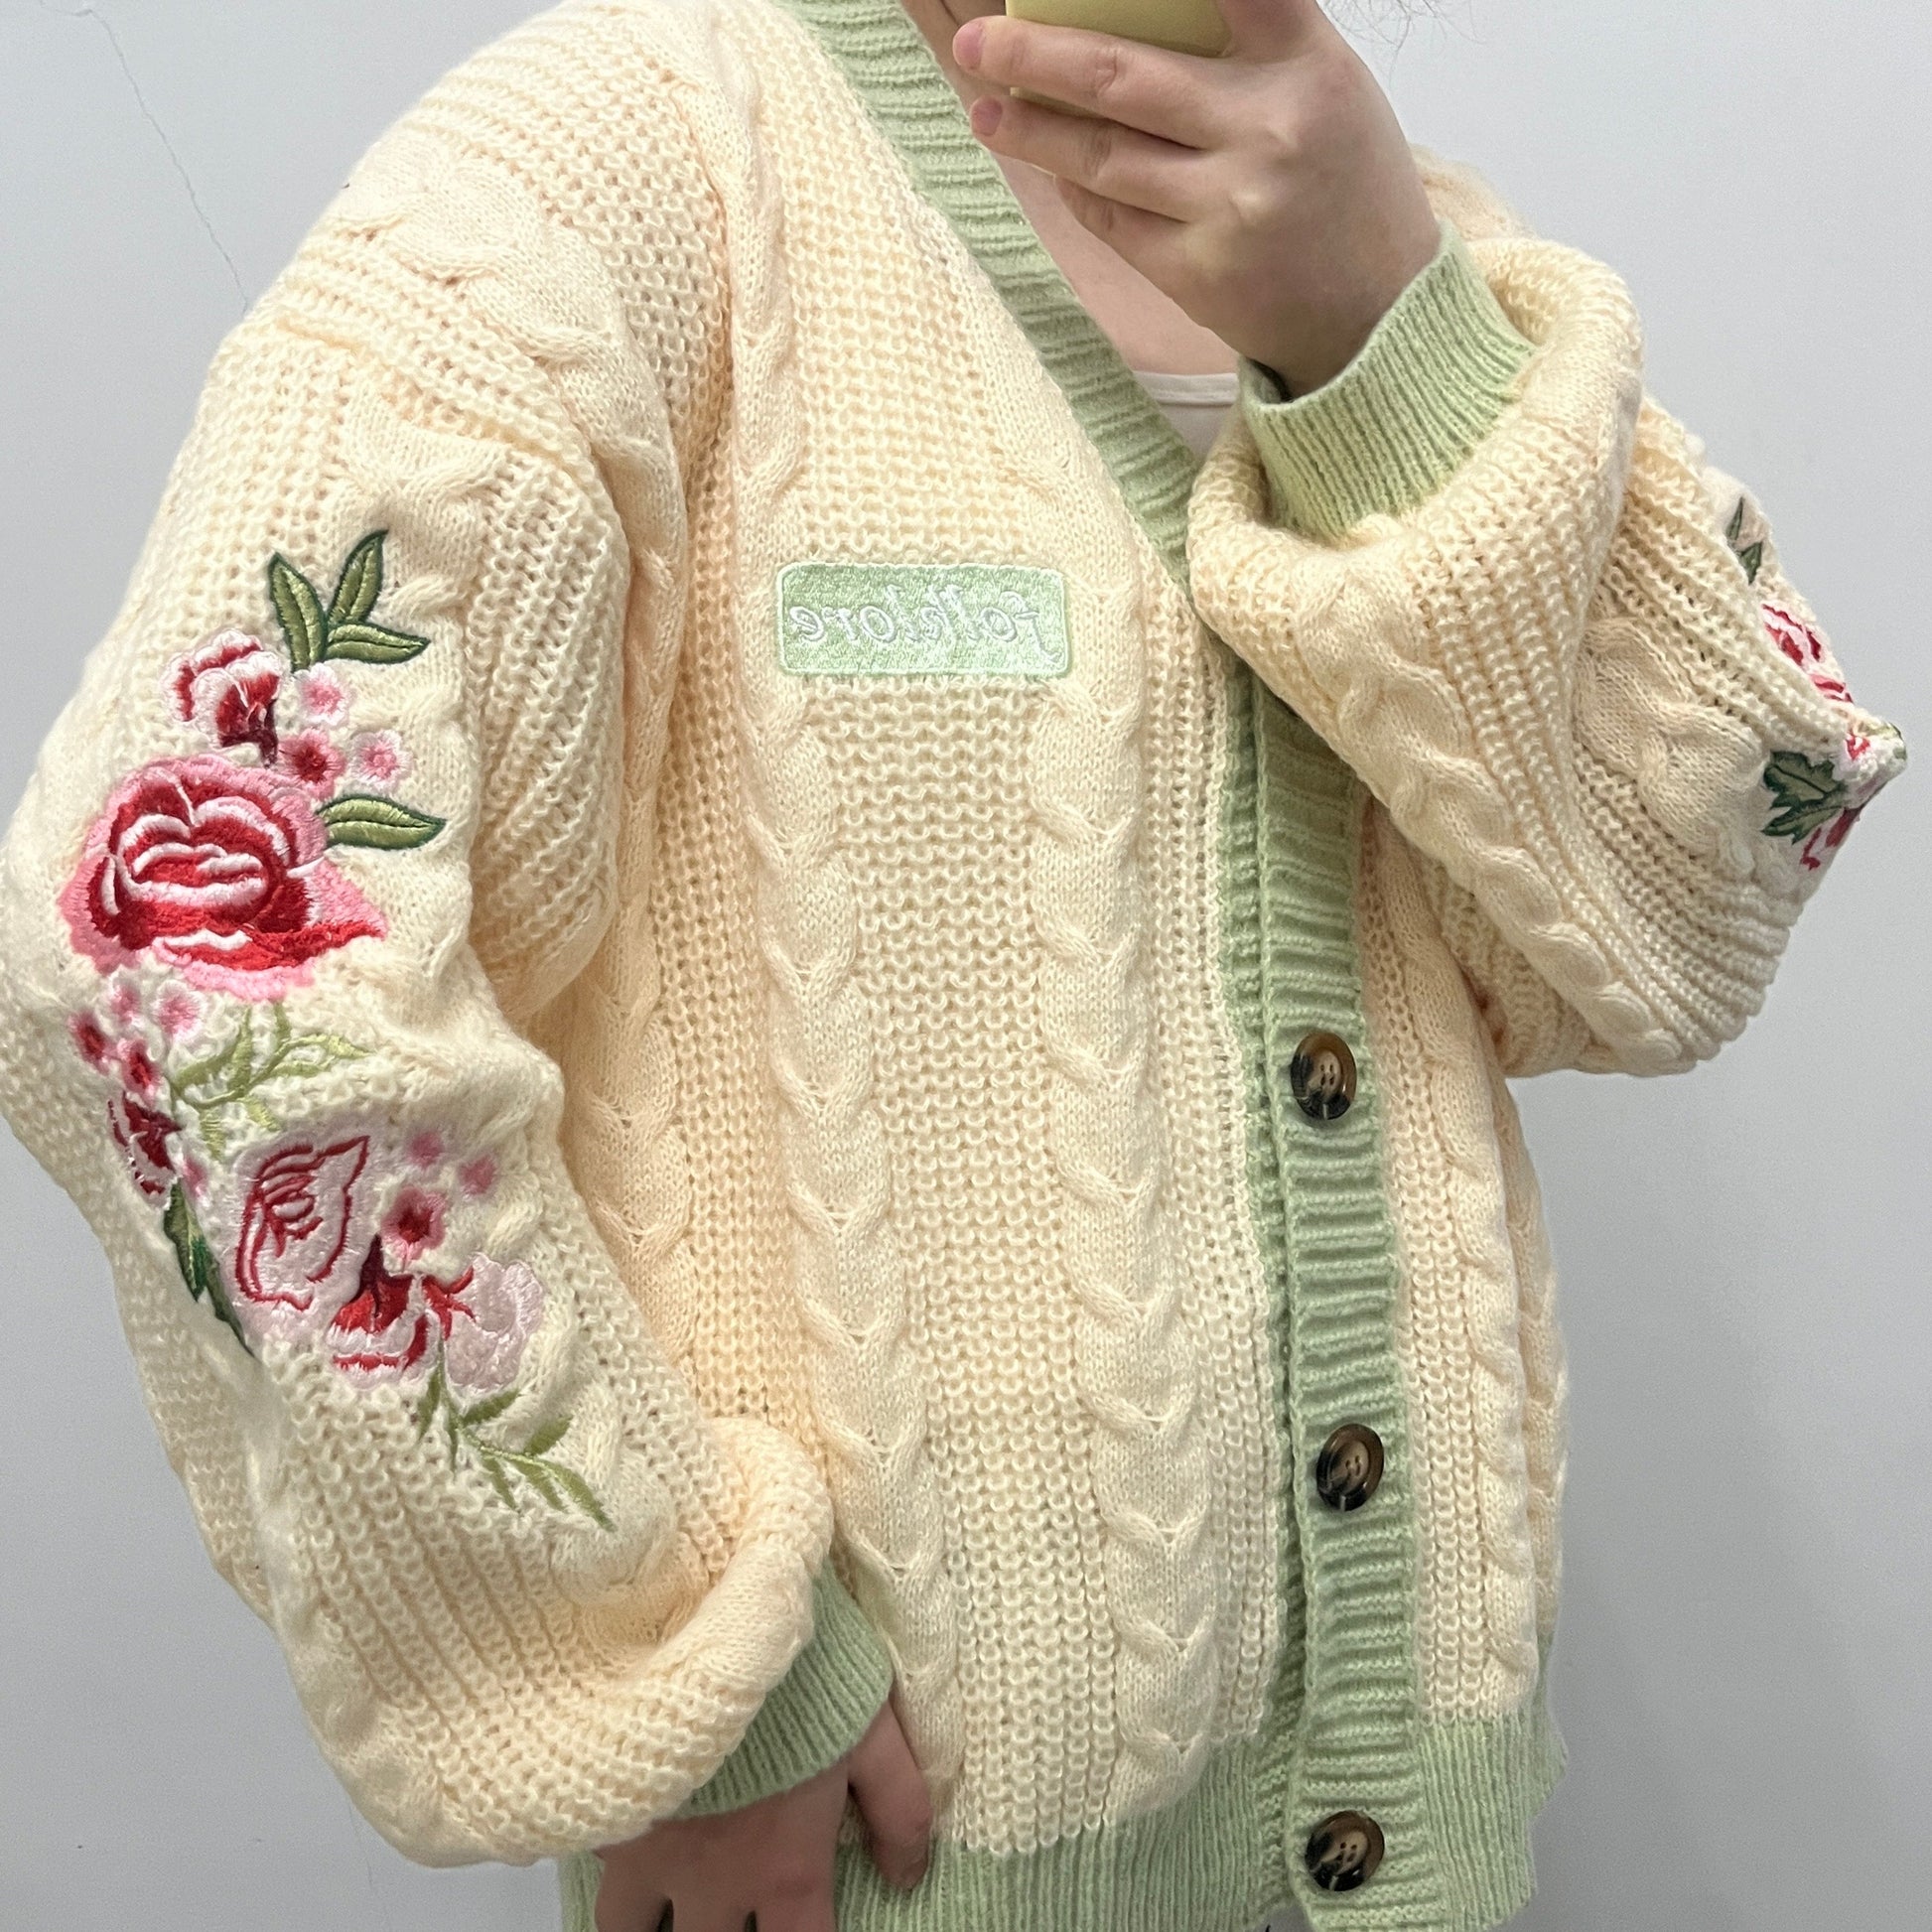 cardigan betty with V-neck, folklore patch and floral embroidery